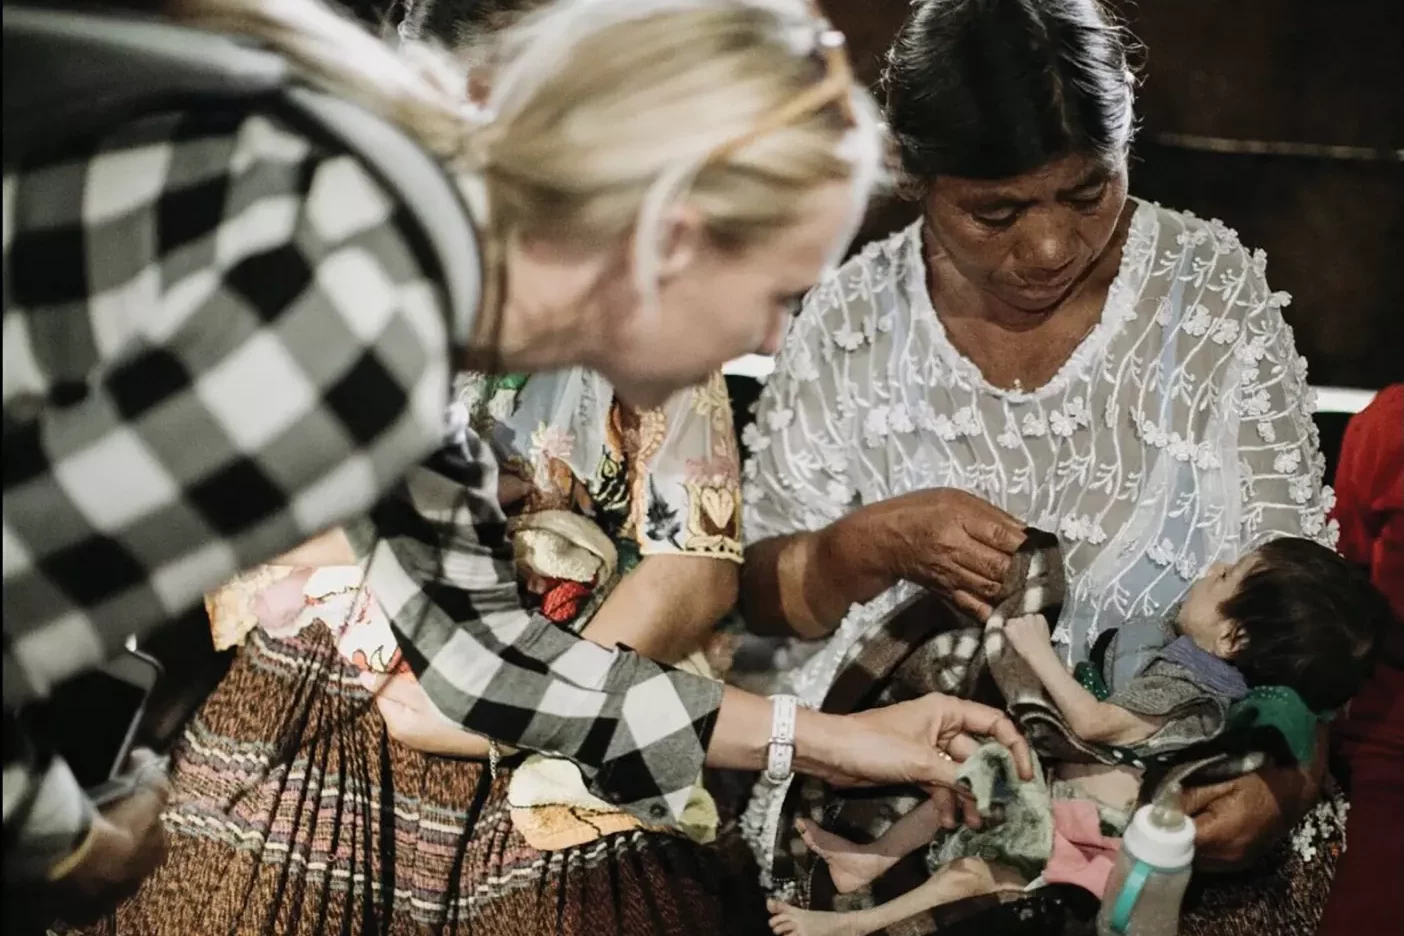 A woman helps a mother and baby in Guatemala.